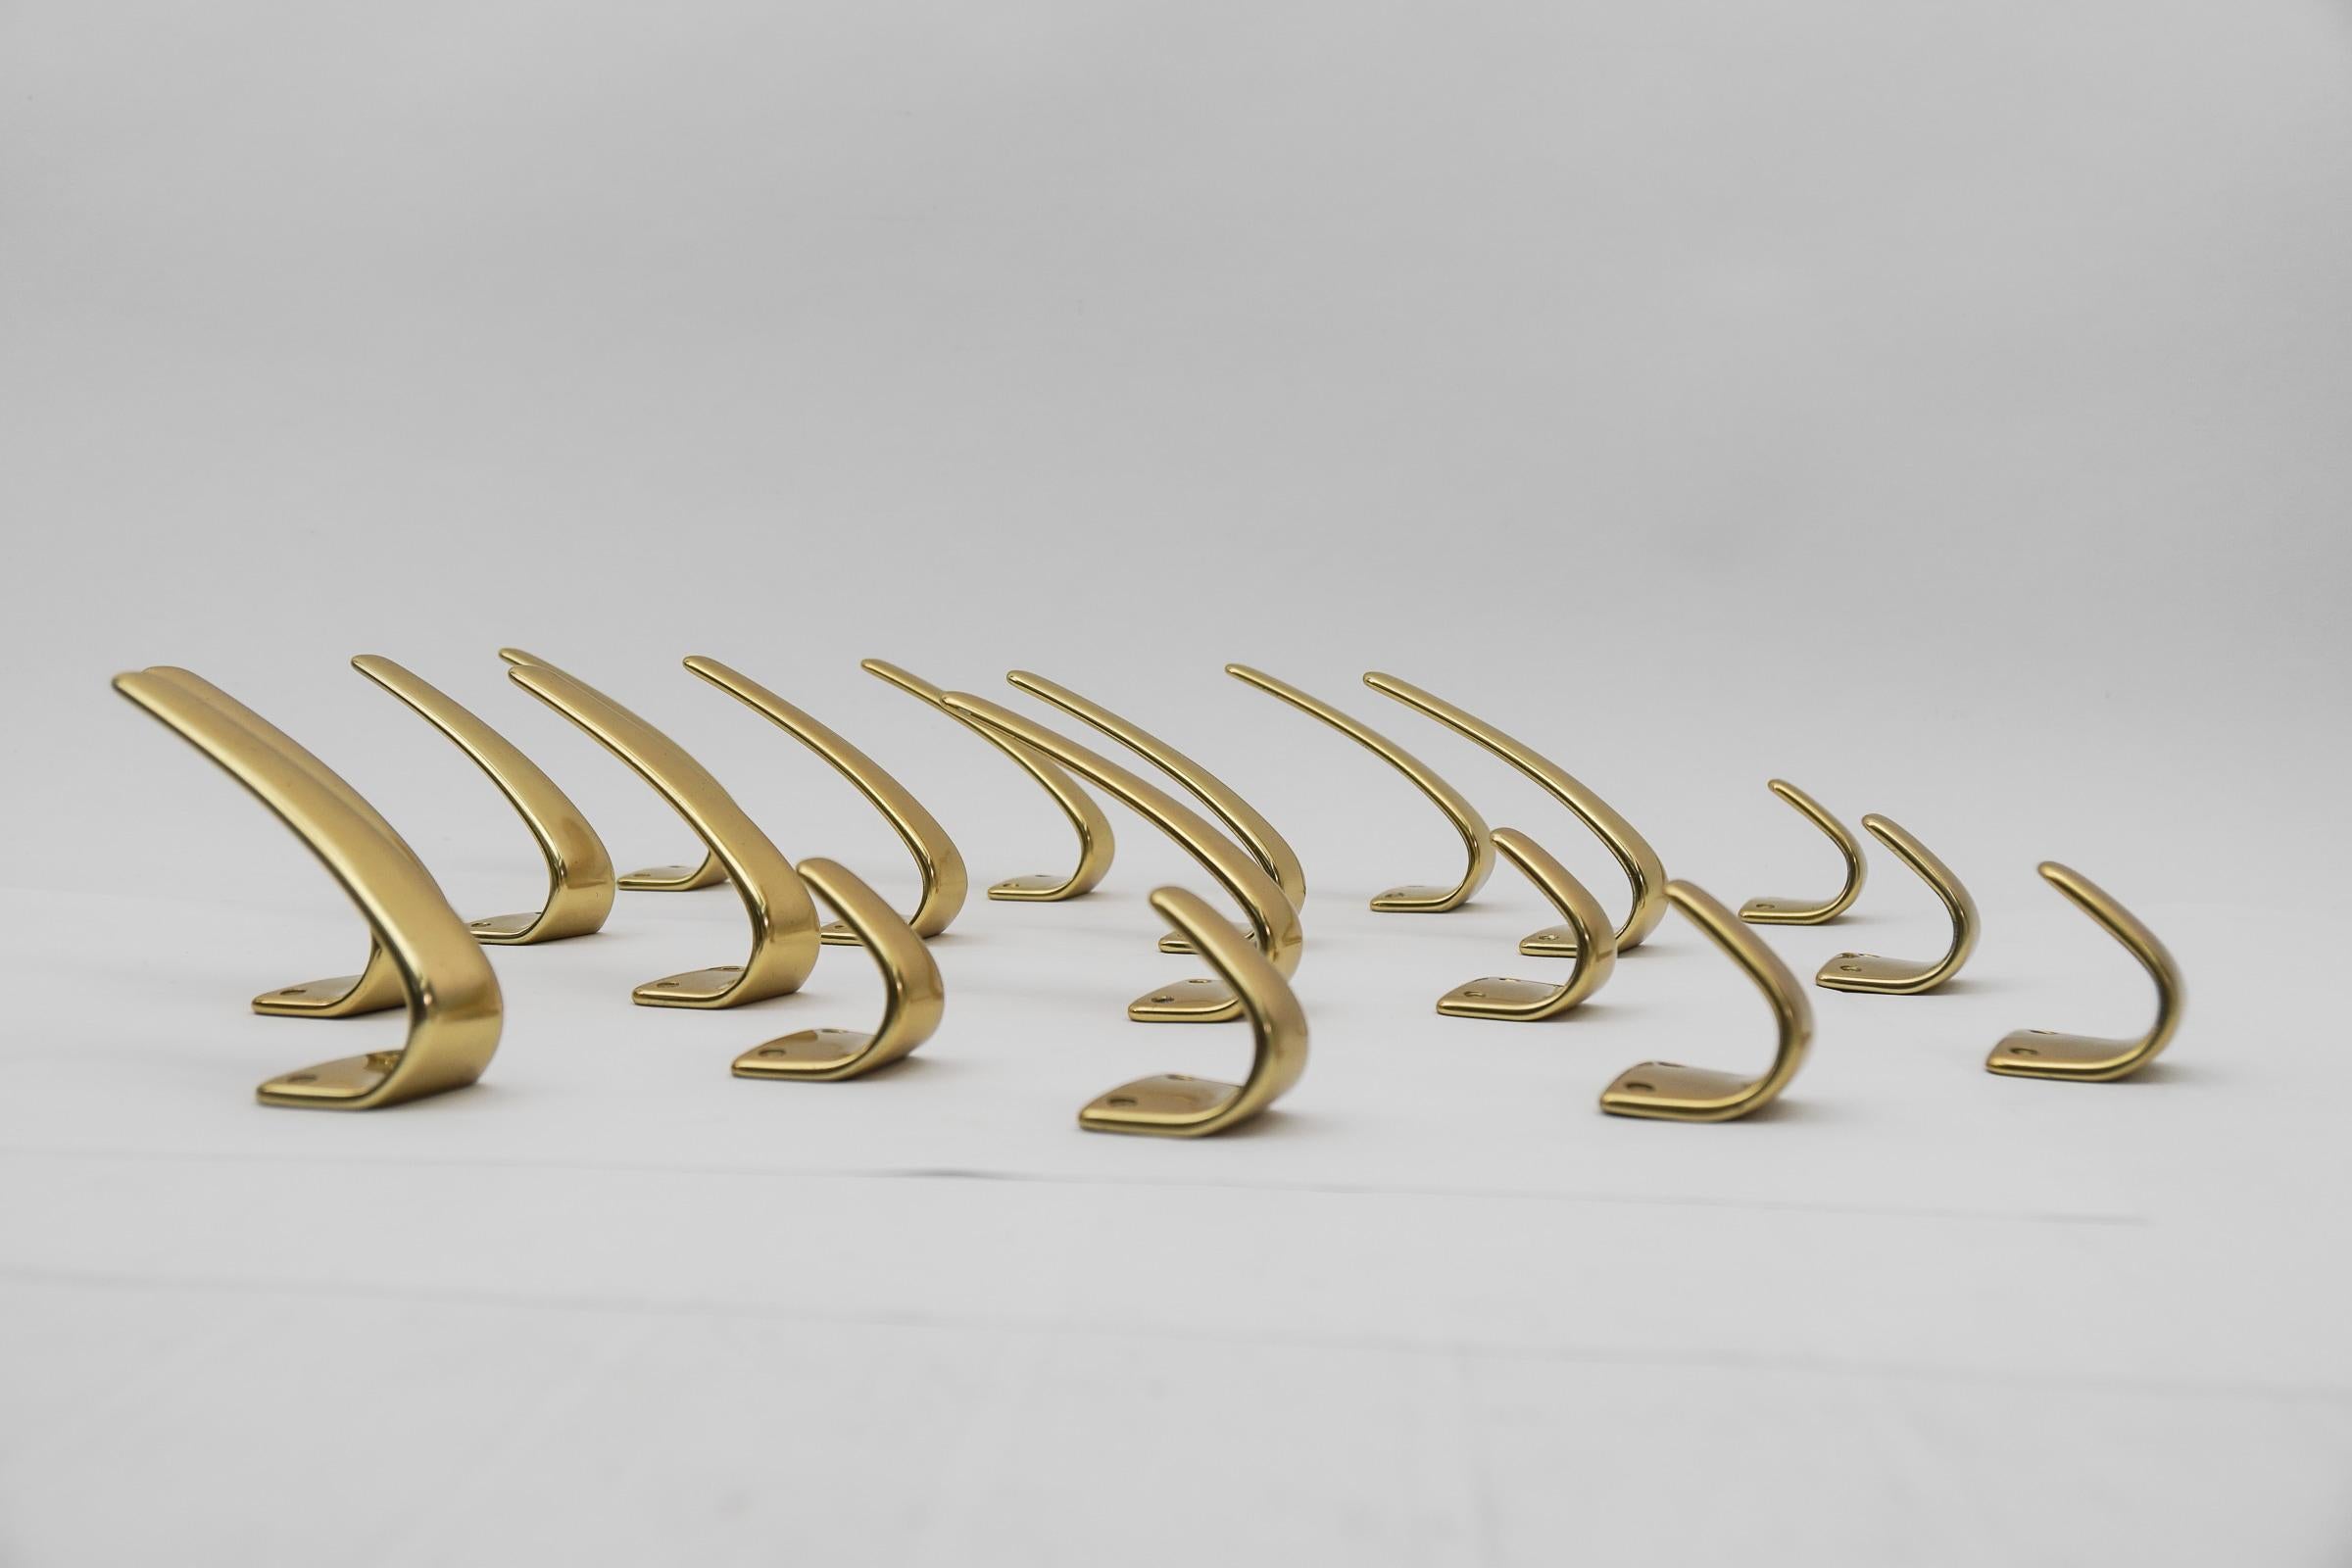 Set of 18 Midcentury Brass Wall Hooks, Austria, 1950s For Sale 5